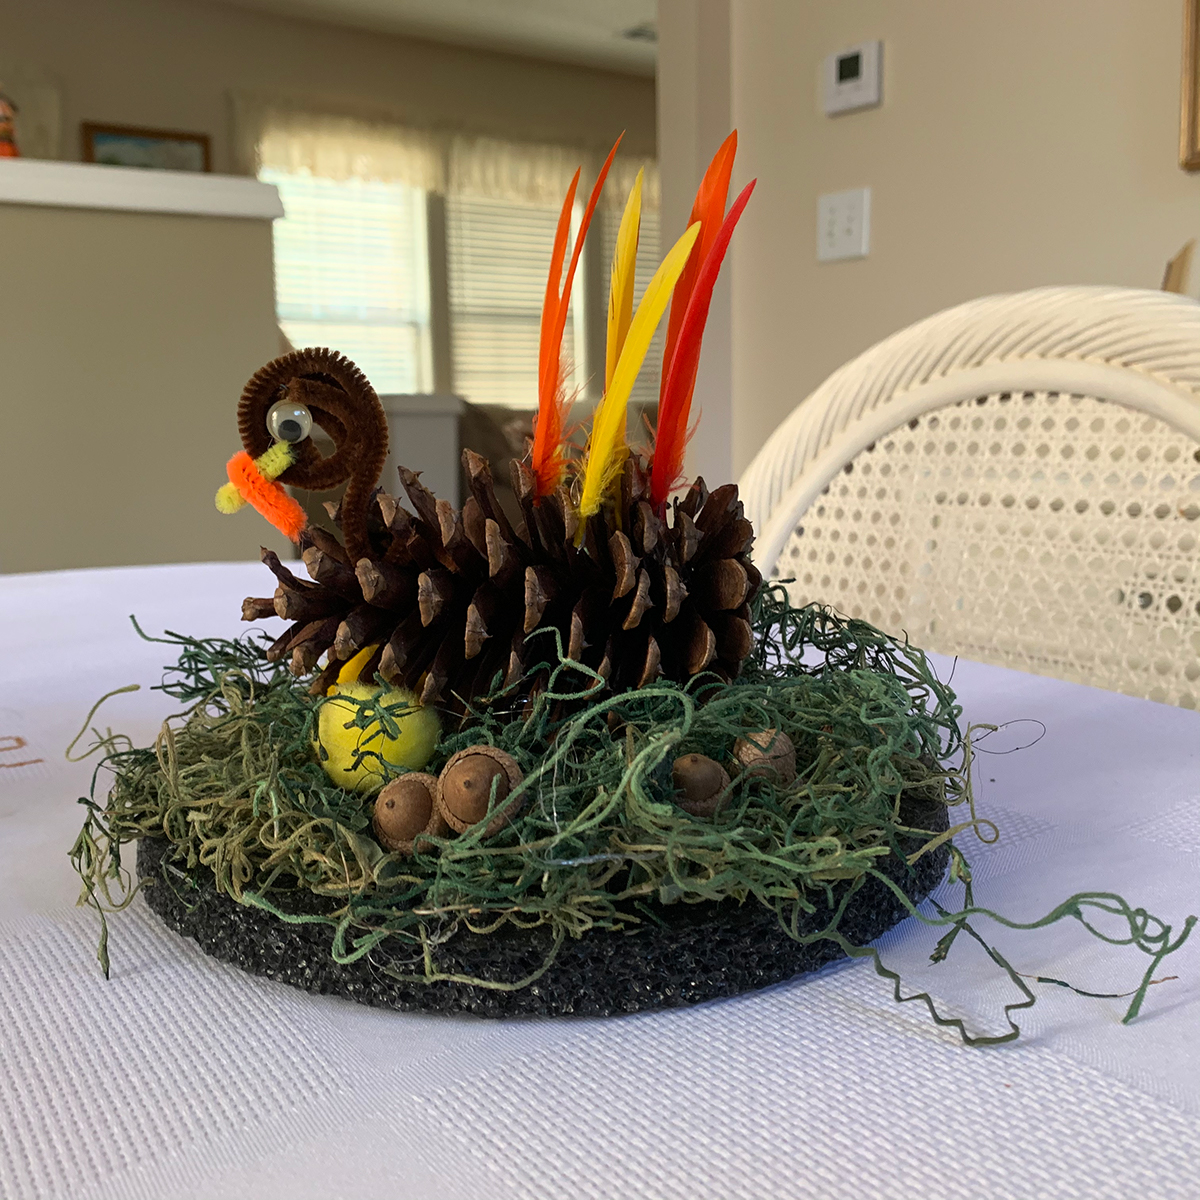 Turkey made out of a pinecone